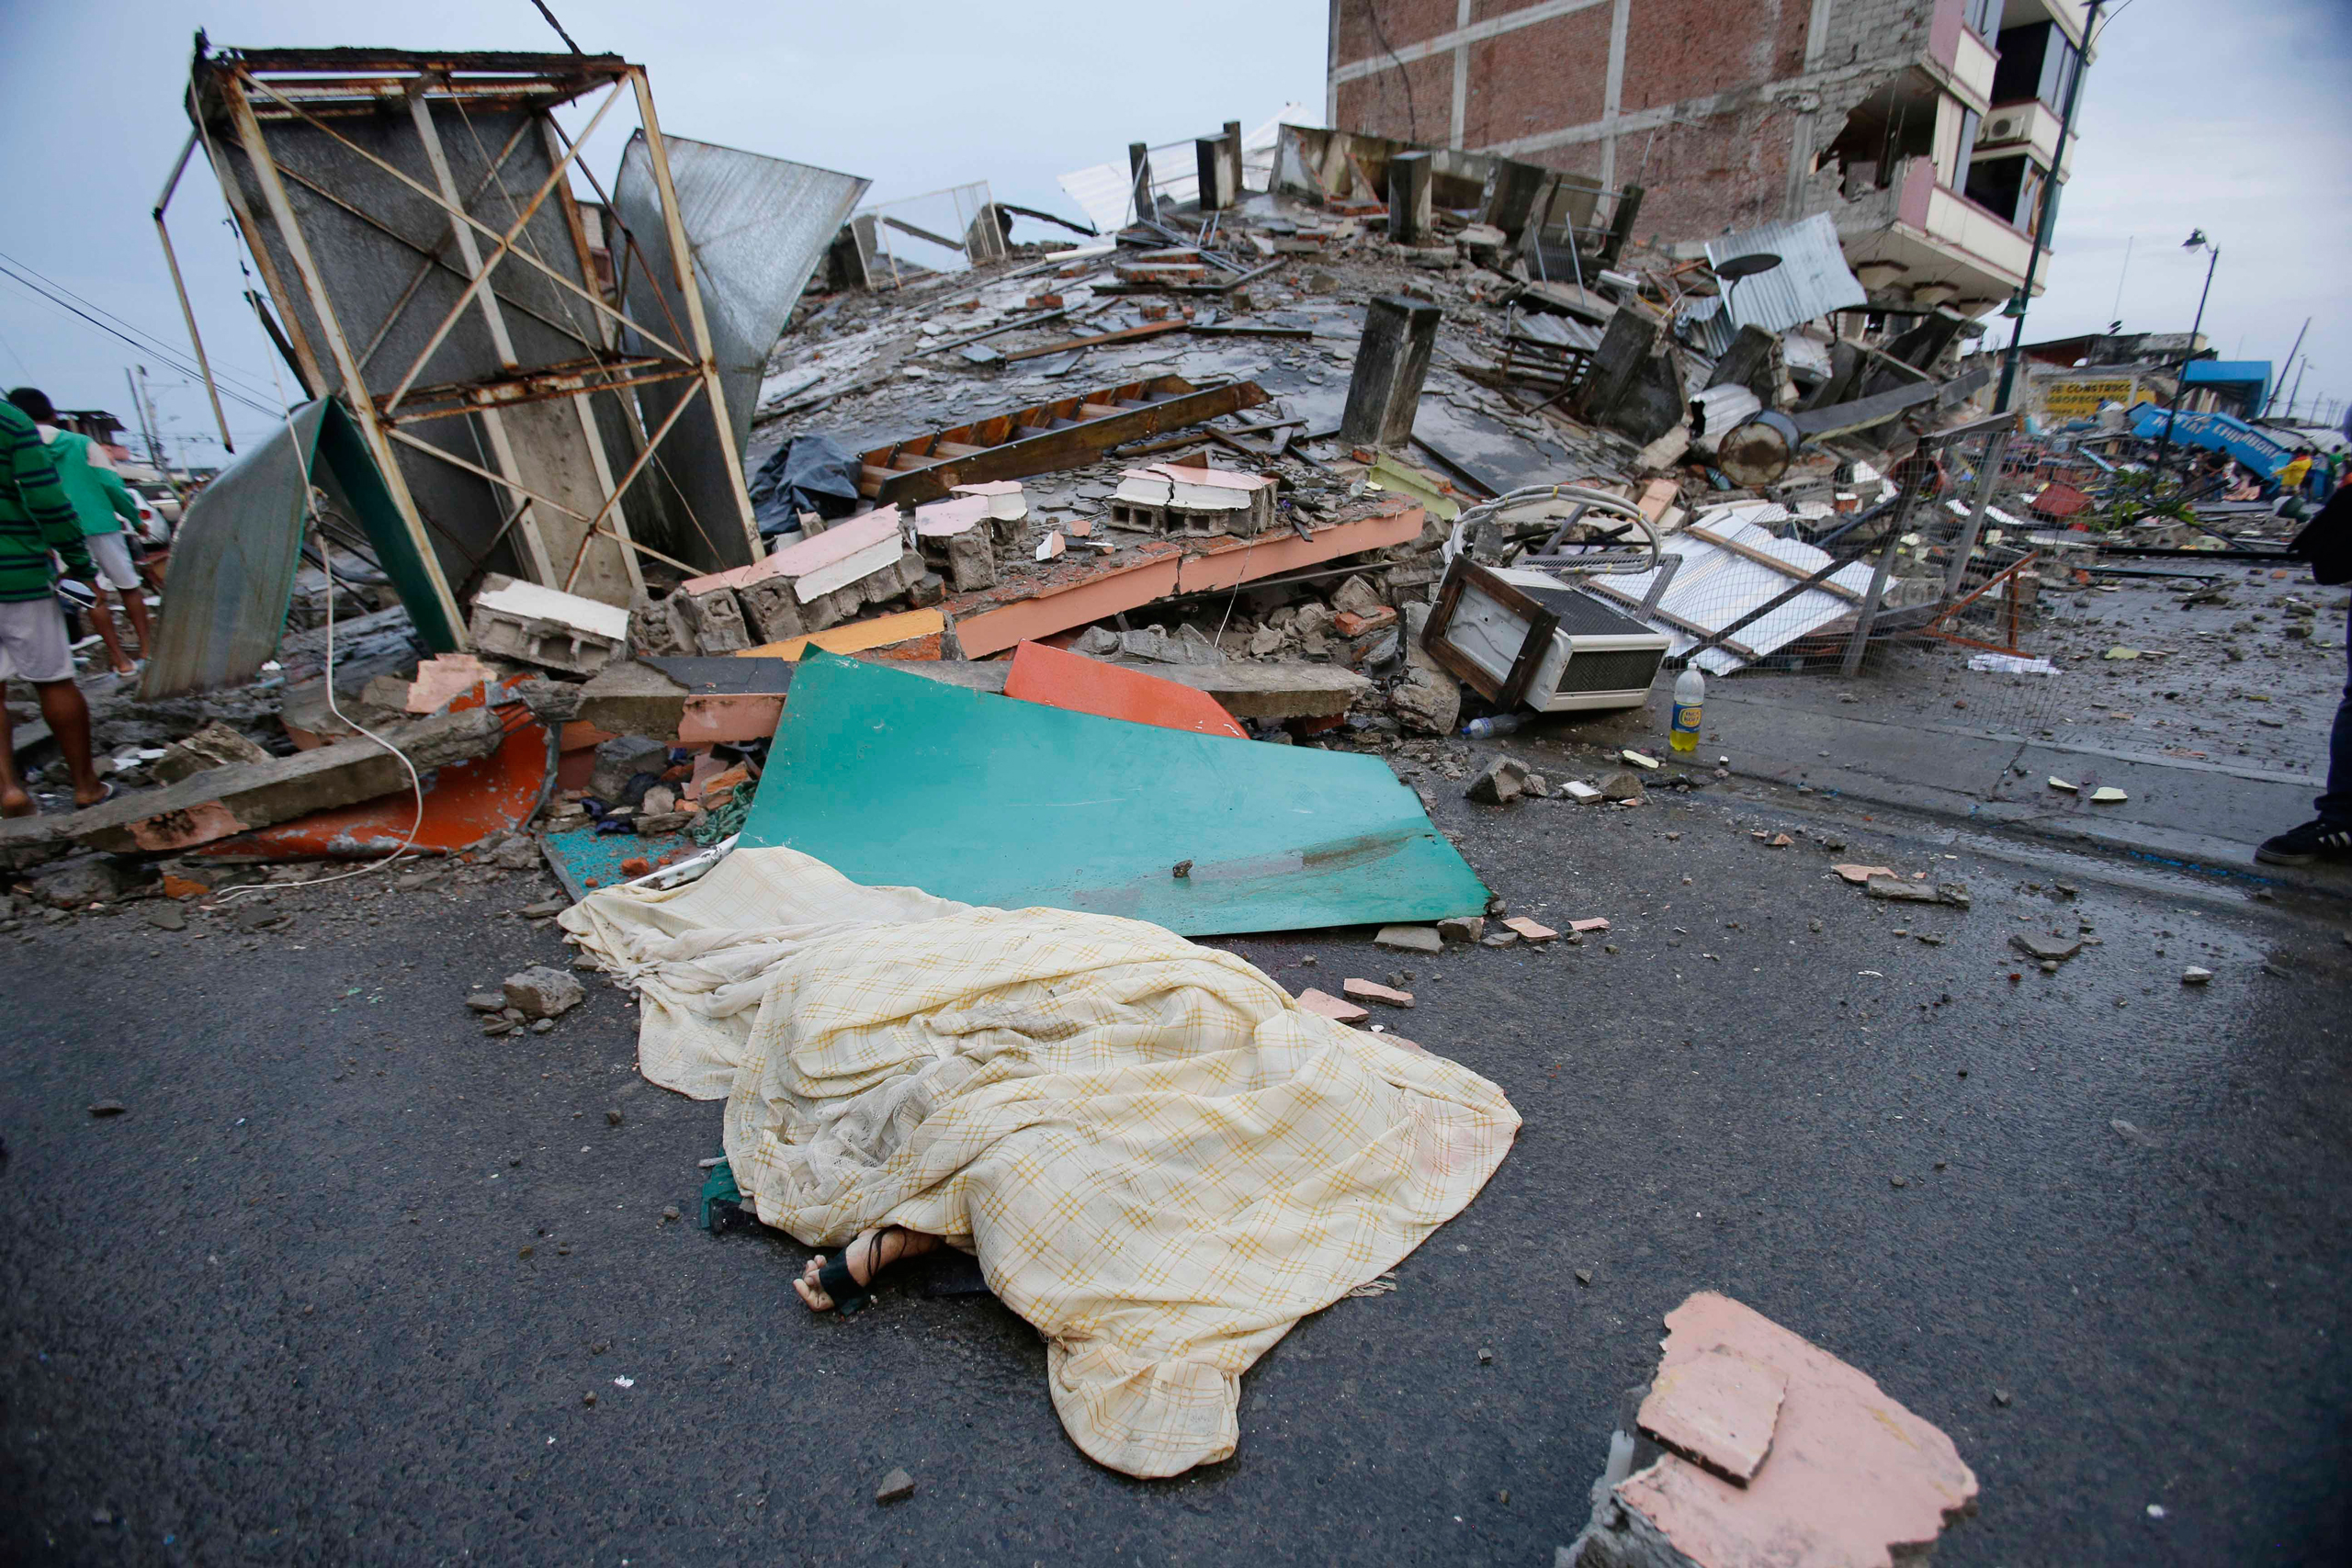 A body covered by sheet lies next to buildings destroyed by an earthquake in Pedernales, Ecuador, on April 17, 2016. The strongest earthquake to hit Ecuad